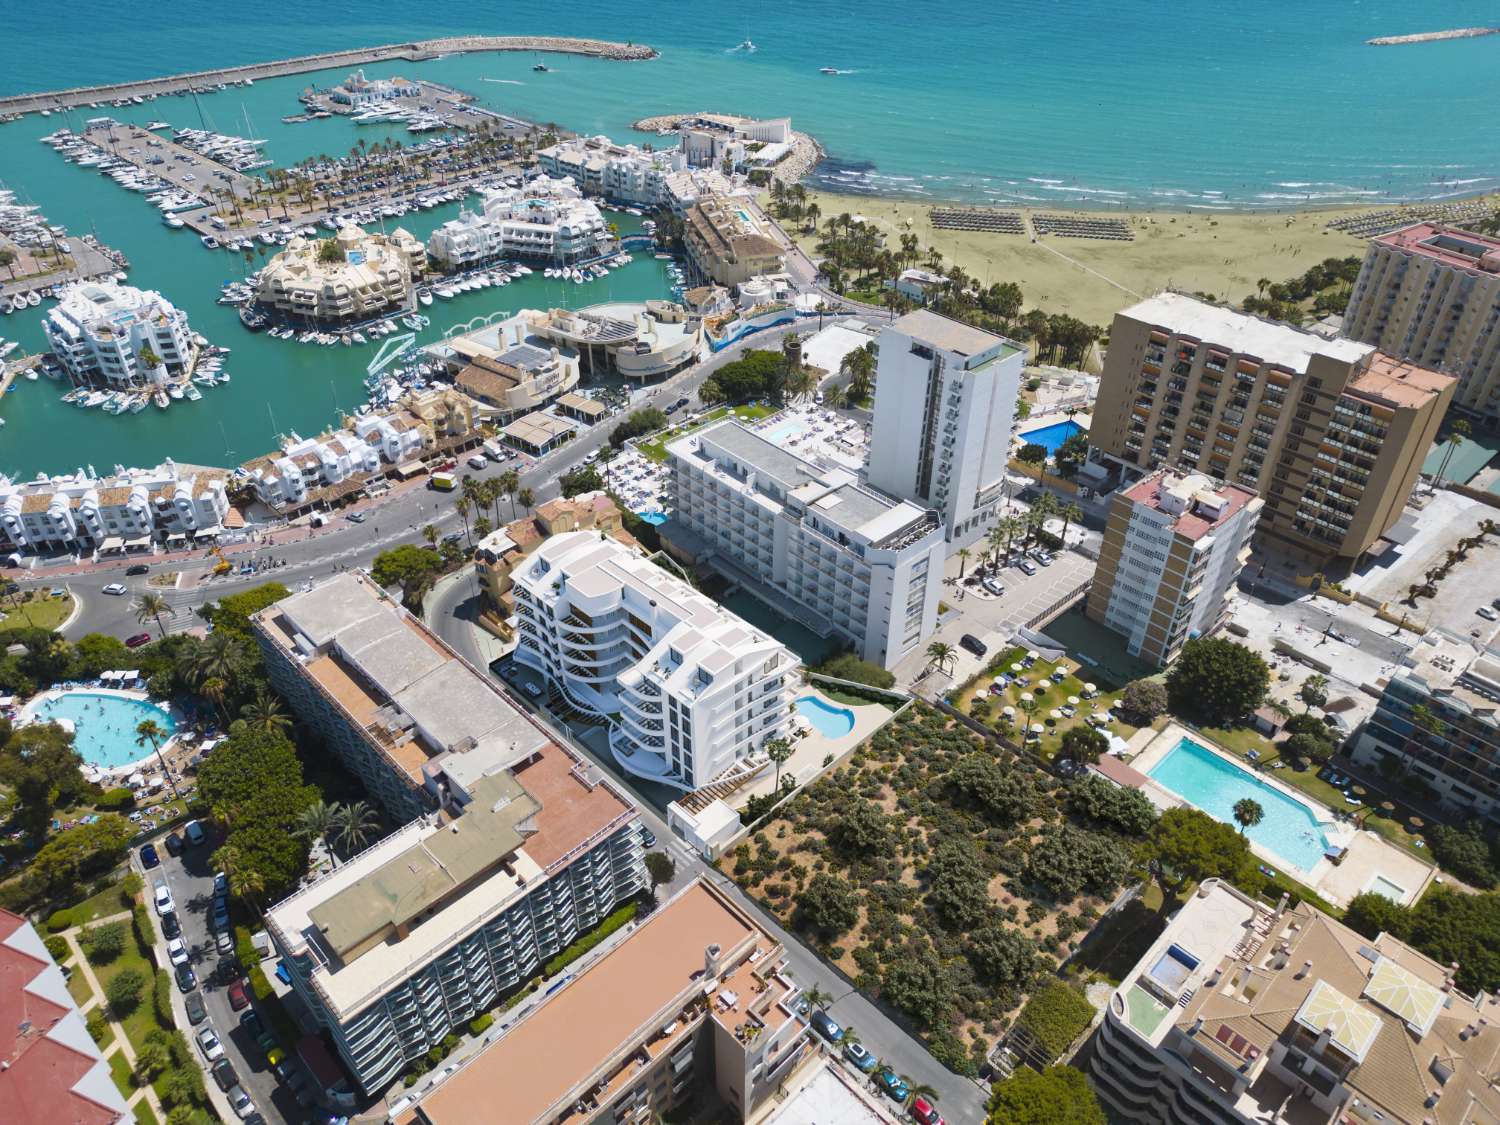 NEW CONSTRUCTION APARTMENT FOR SALE IN BENALMÁDENA COSTA